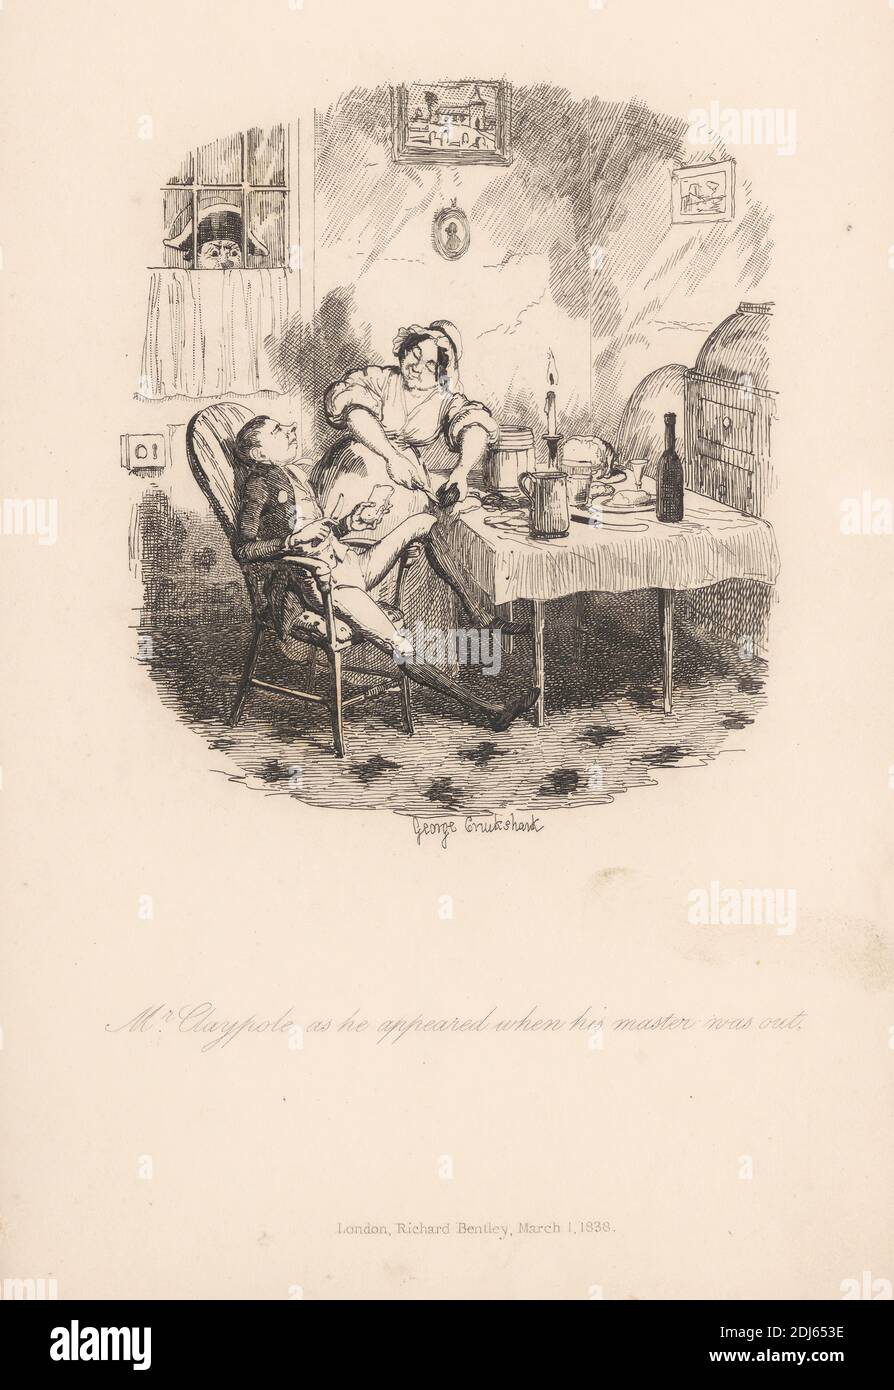 Mr. Claypole as he Appeared when his Master was out., Print made by George Cruikshank, 1792–1878, British, 1838, Etching on medium, slightly textured, cream wove paper Stock Photo